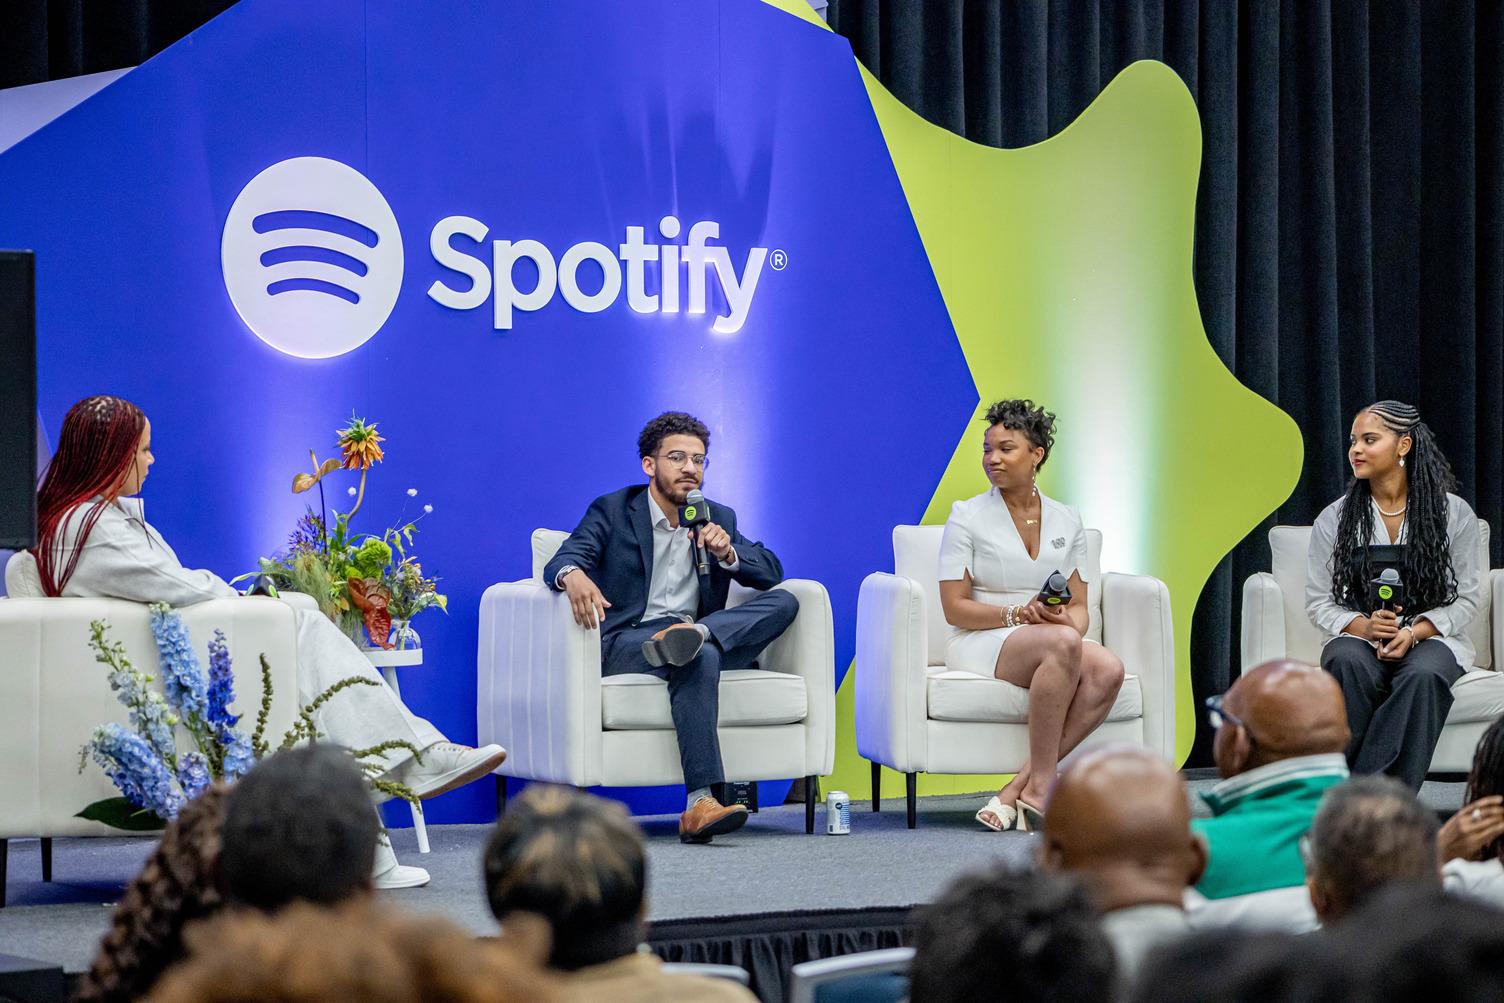 Howard University professor Nikole Hannah-Jones and students Jacob Smith, Zoe Cummings and Trinity Webster-Bass discuss their work for The 1619 Project: The College Edition in a panel discussion.